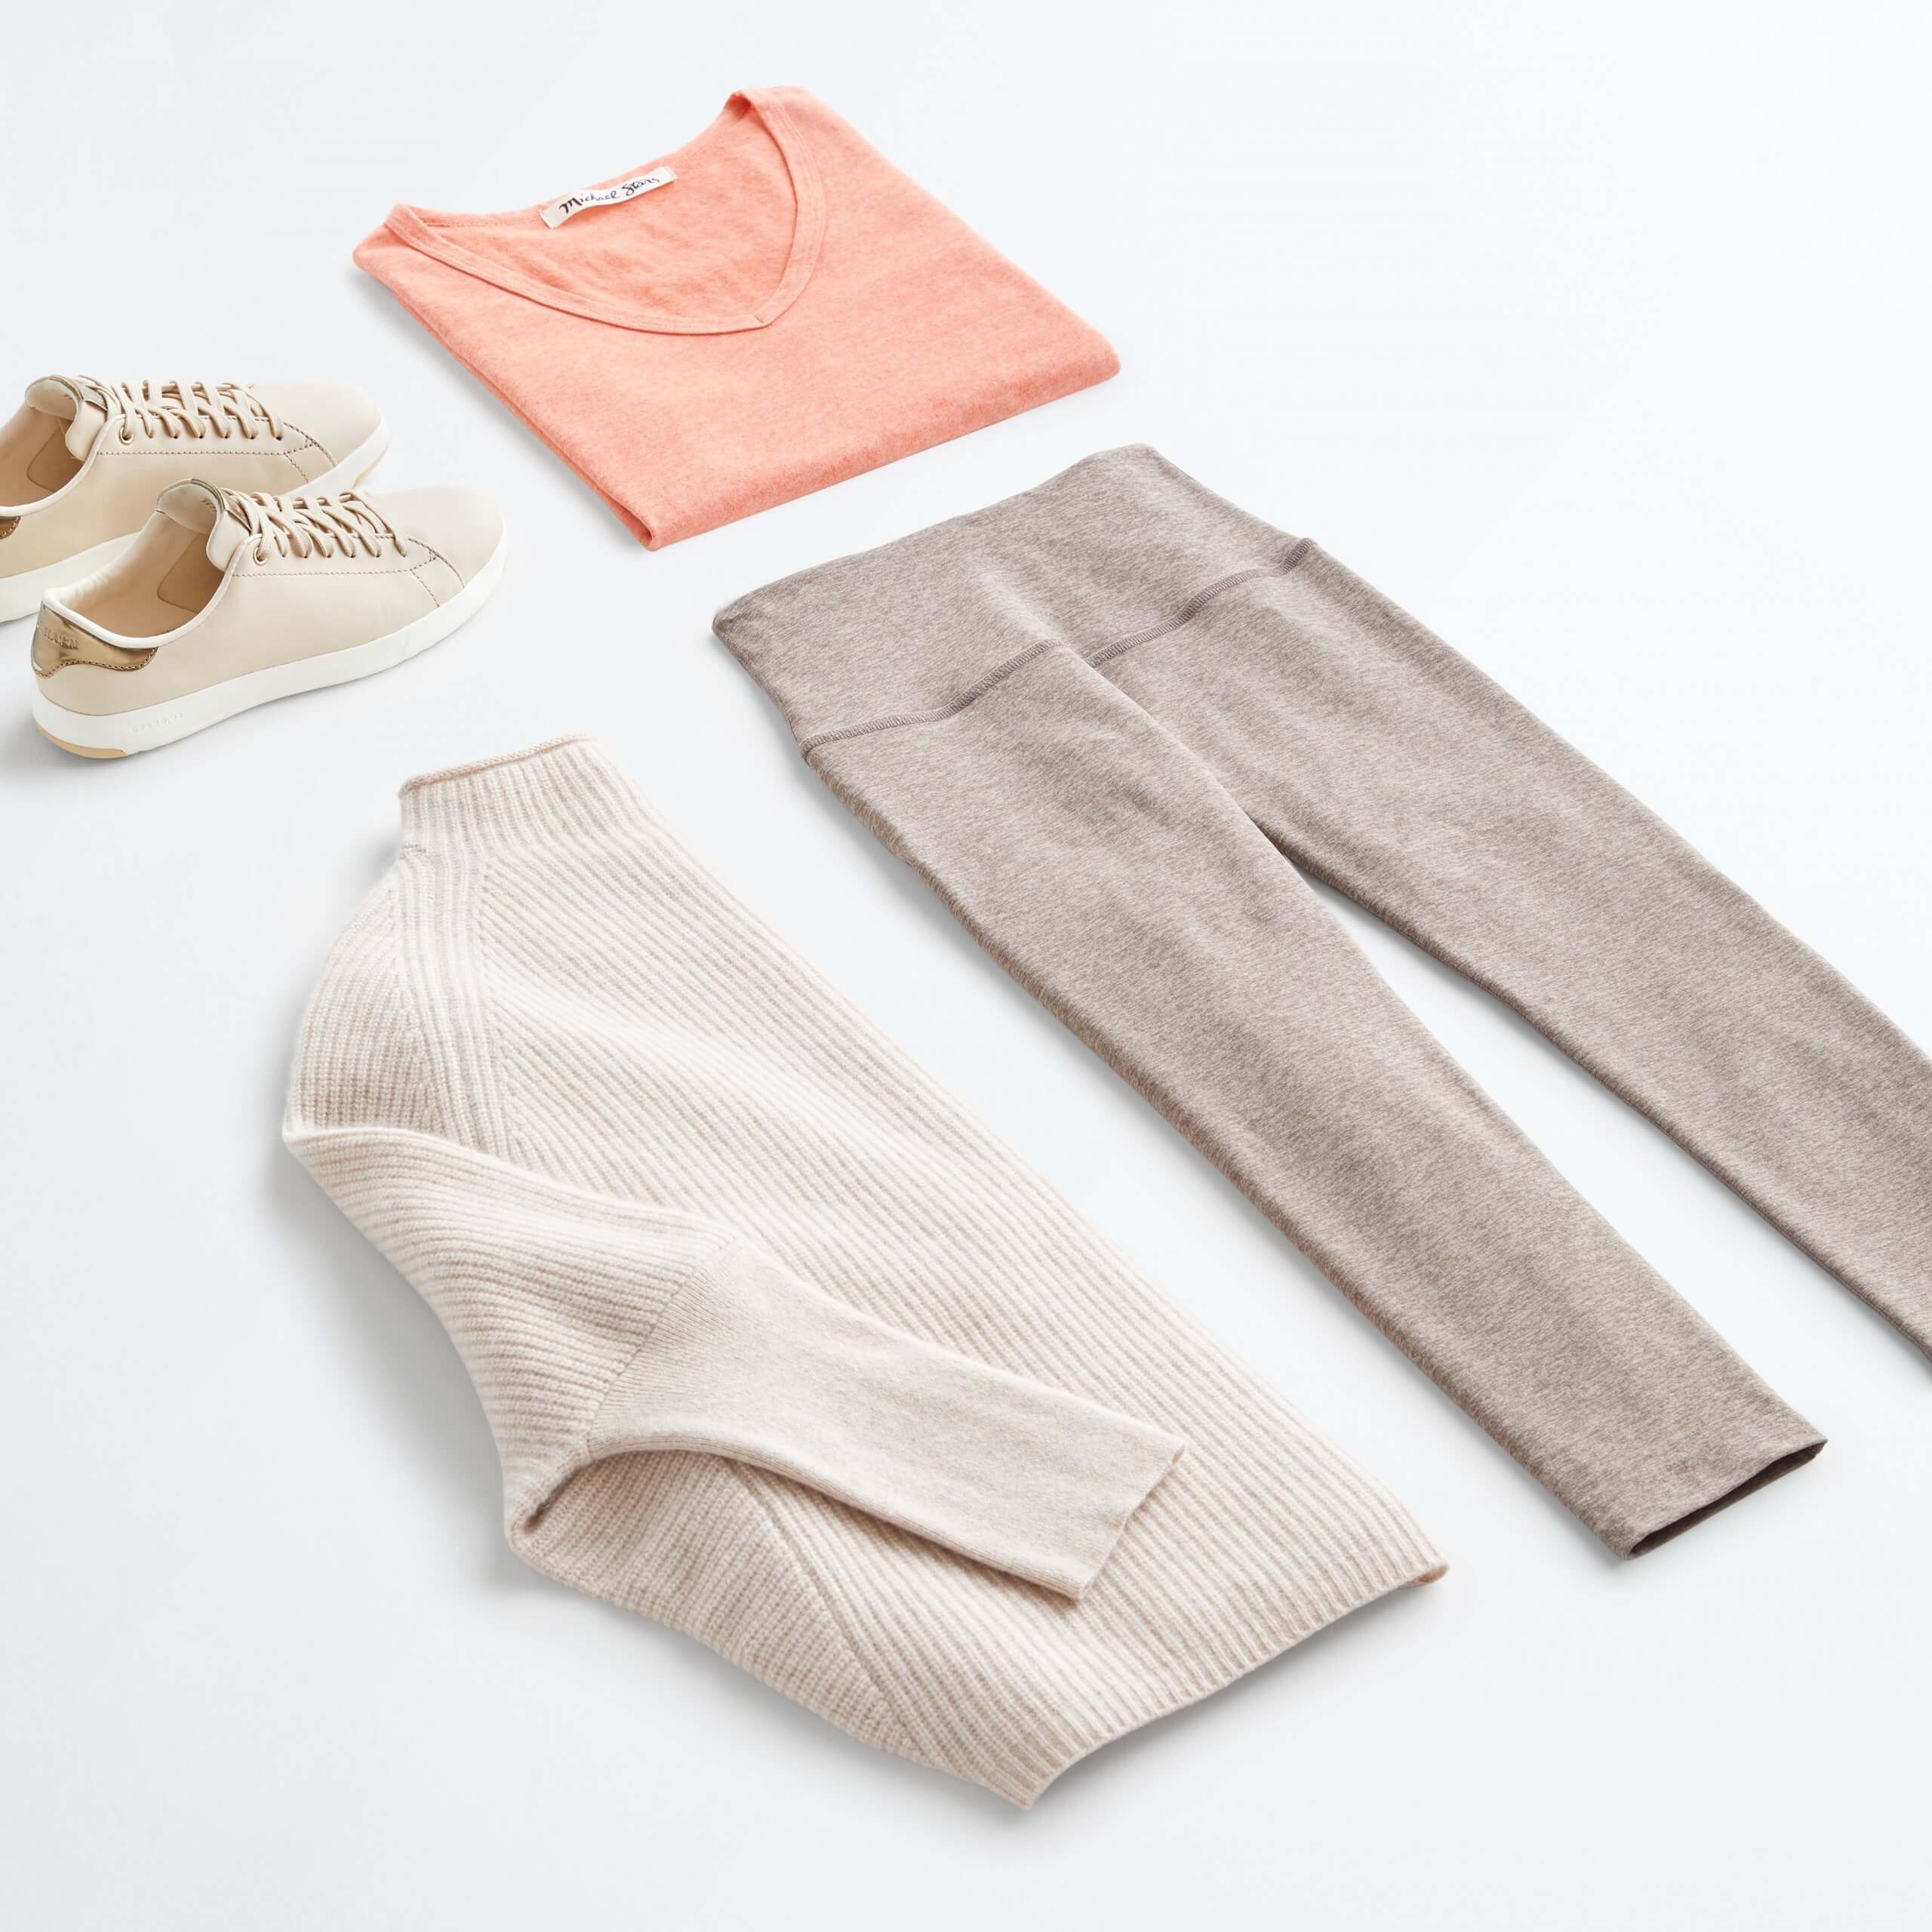 Stitch Fix Women’s outfit laydown featuring beige leggings, cream pullover, pink t-shirt and tan sneakers. 